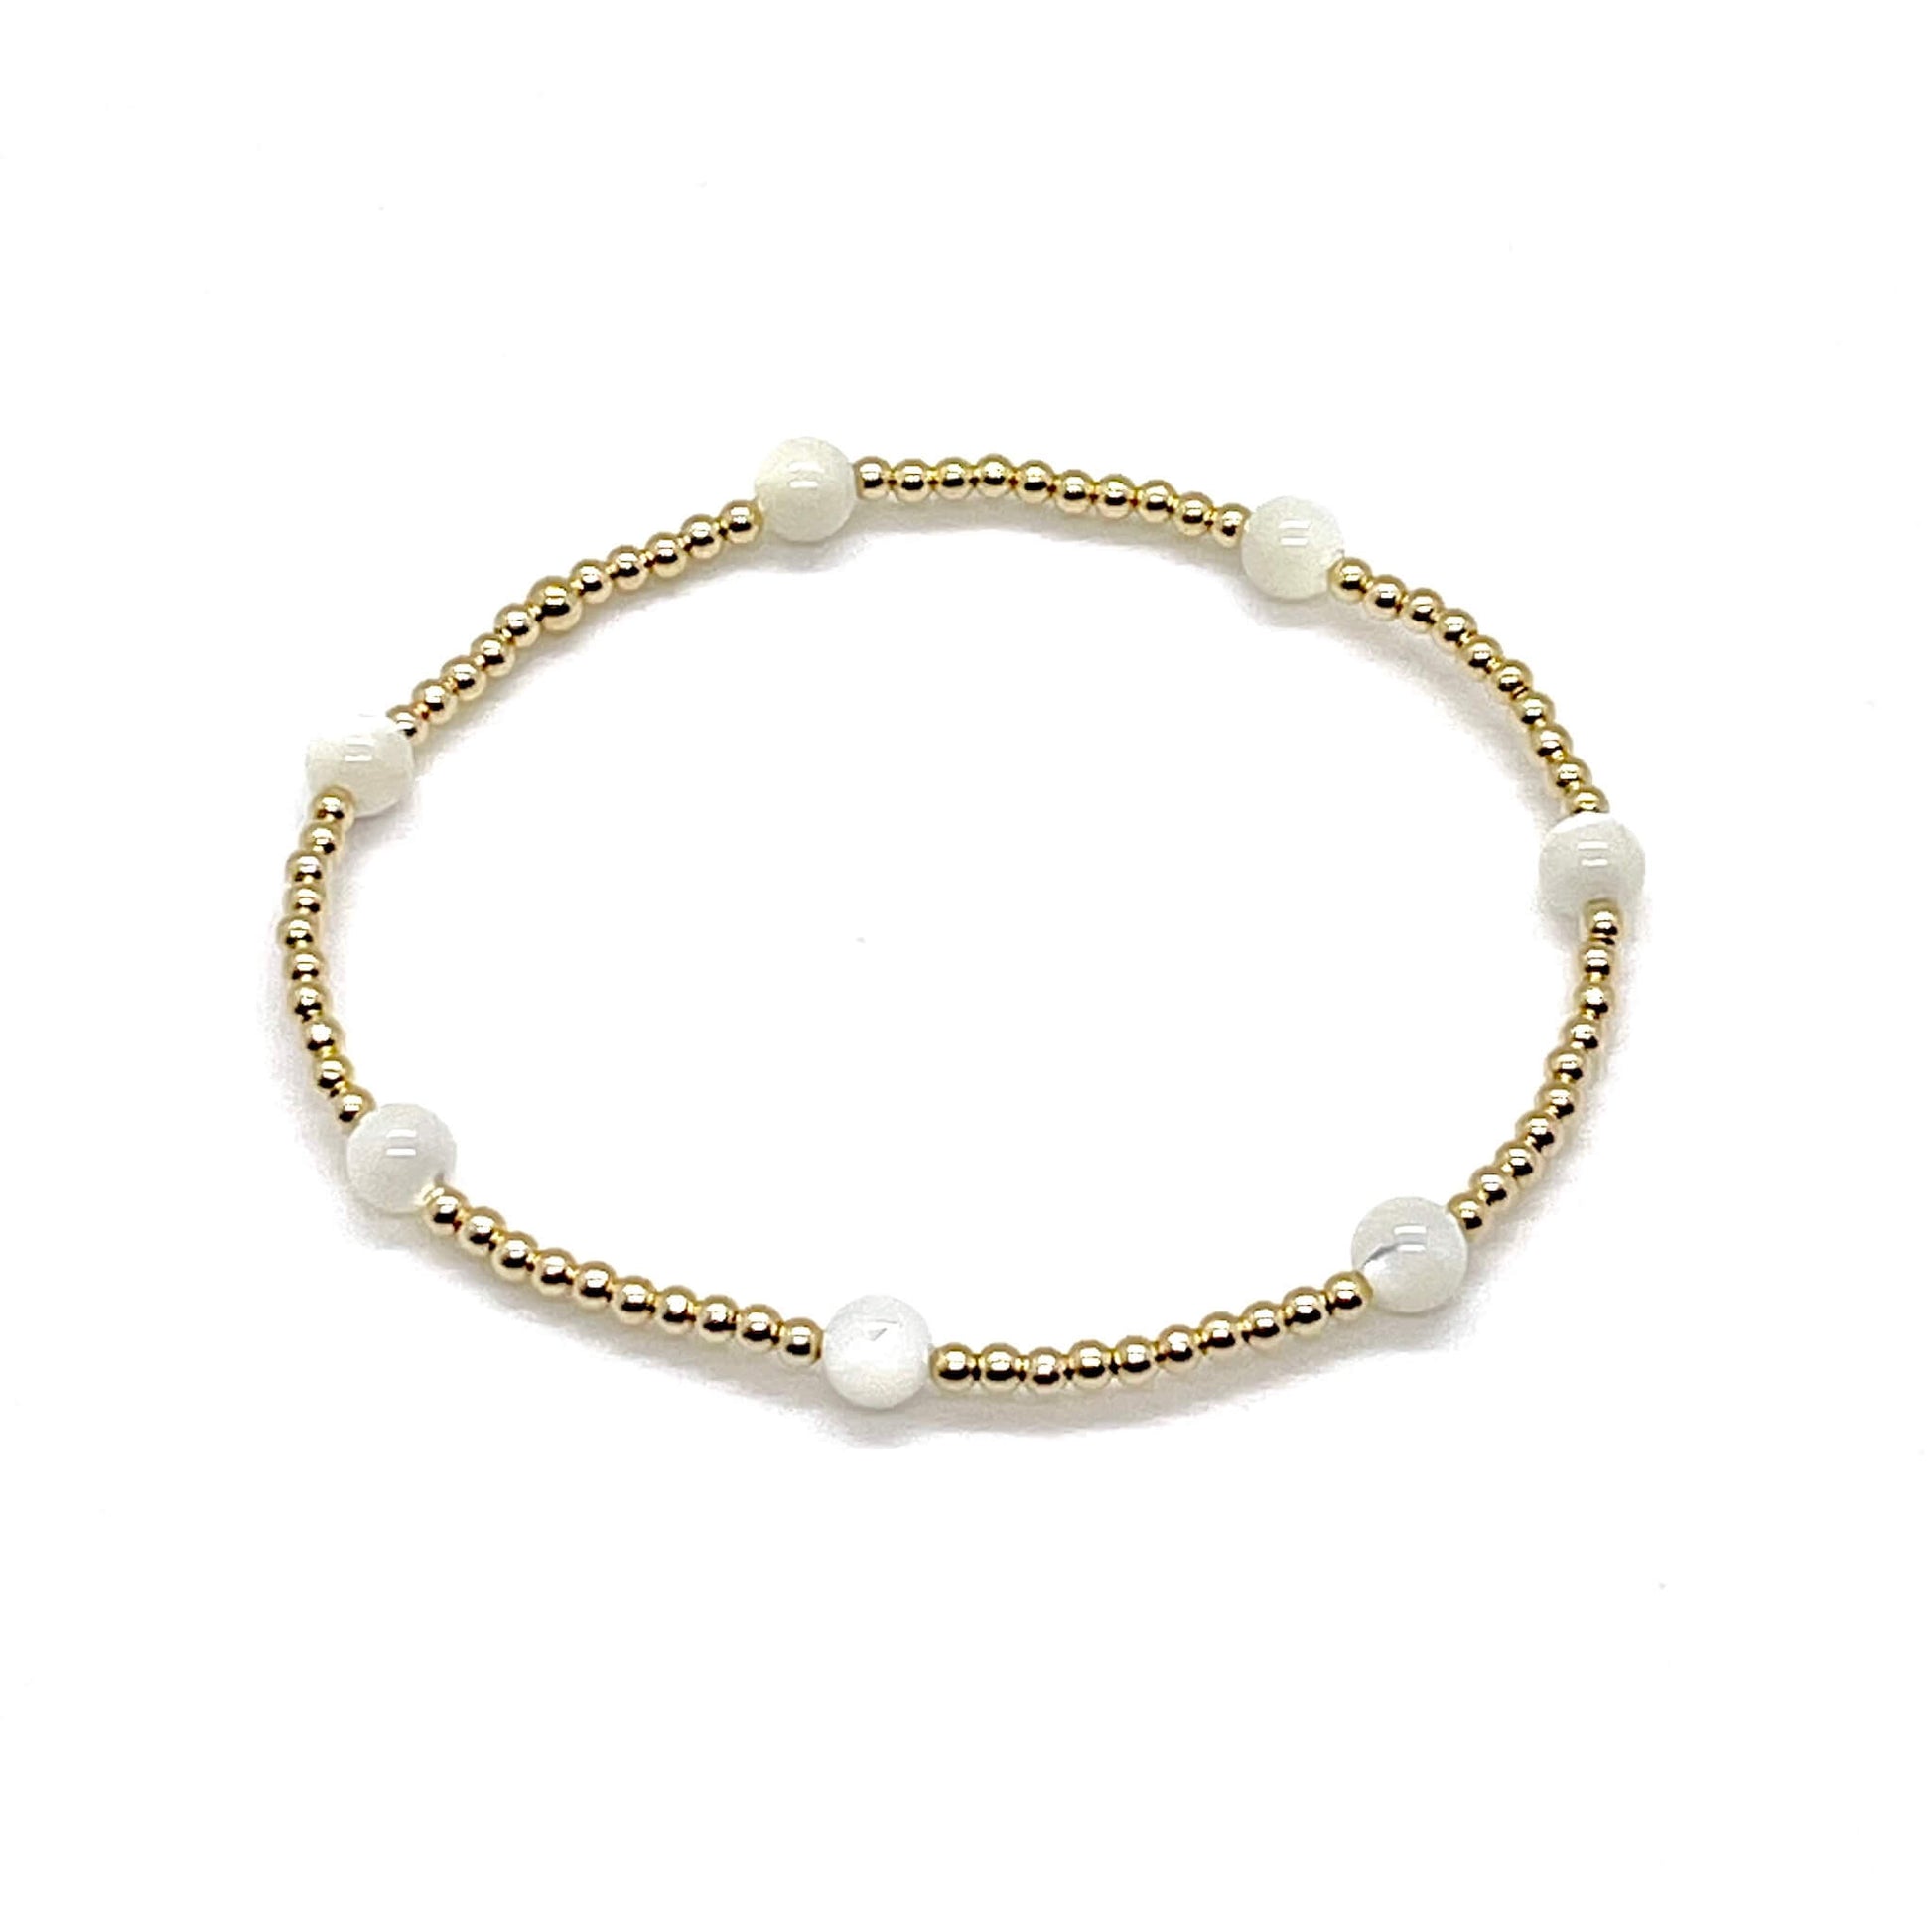 Pearl bracelet for bridesmaids with 14K gold filled 2mm beads and 4mm mother-of-pearl beads.